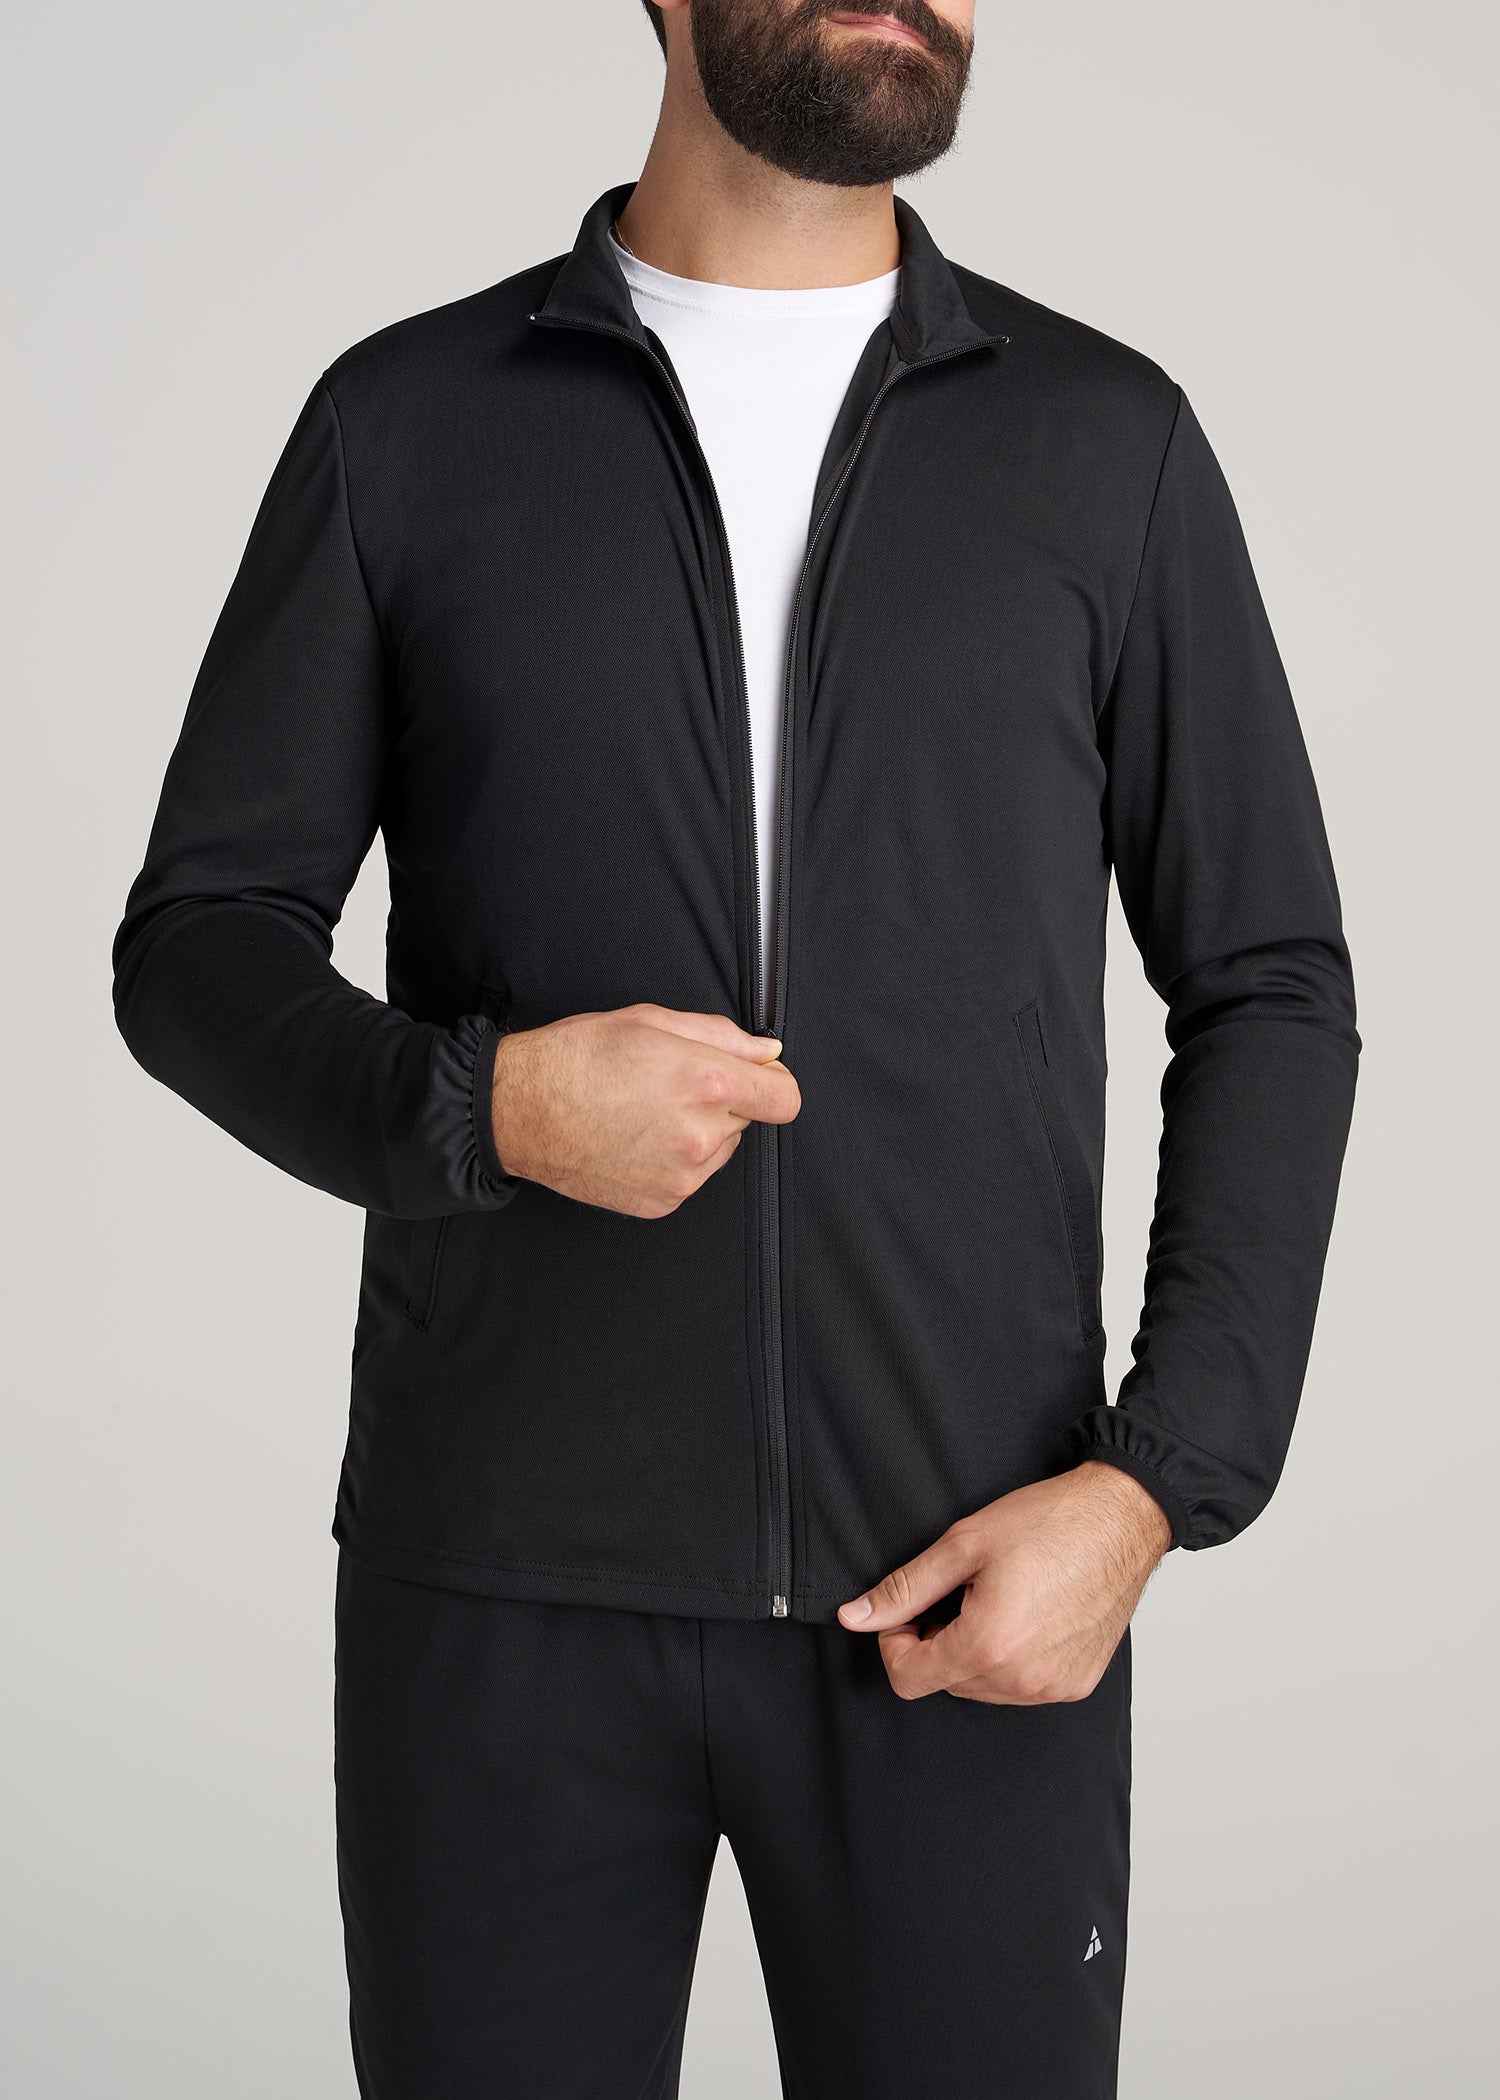 A.T. Performance Light Weight Jacket in Black - Tall Men's Jacket